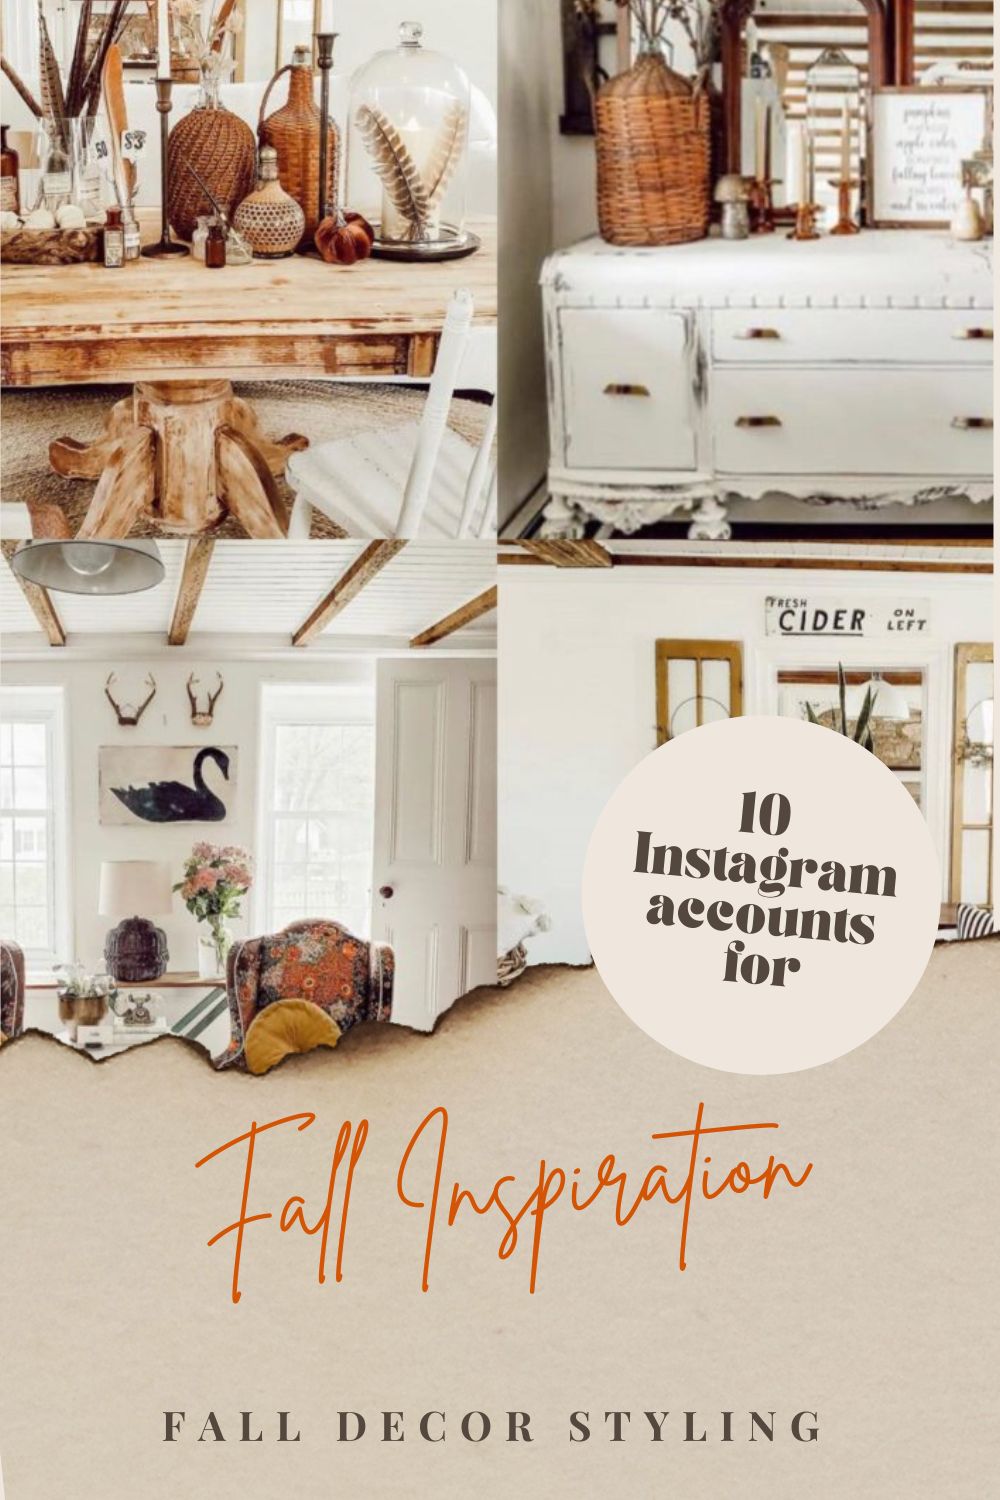 10 Instagram Accounts You Need To Follow for Fall Inspiration